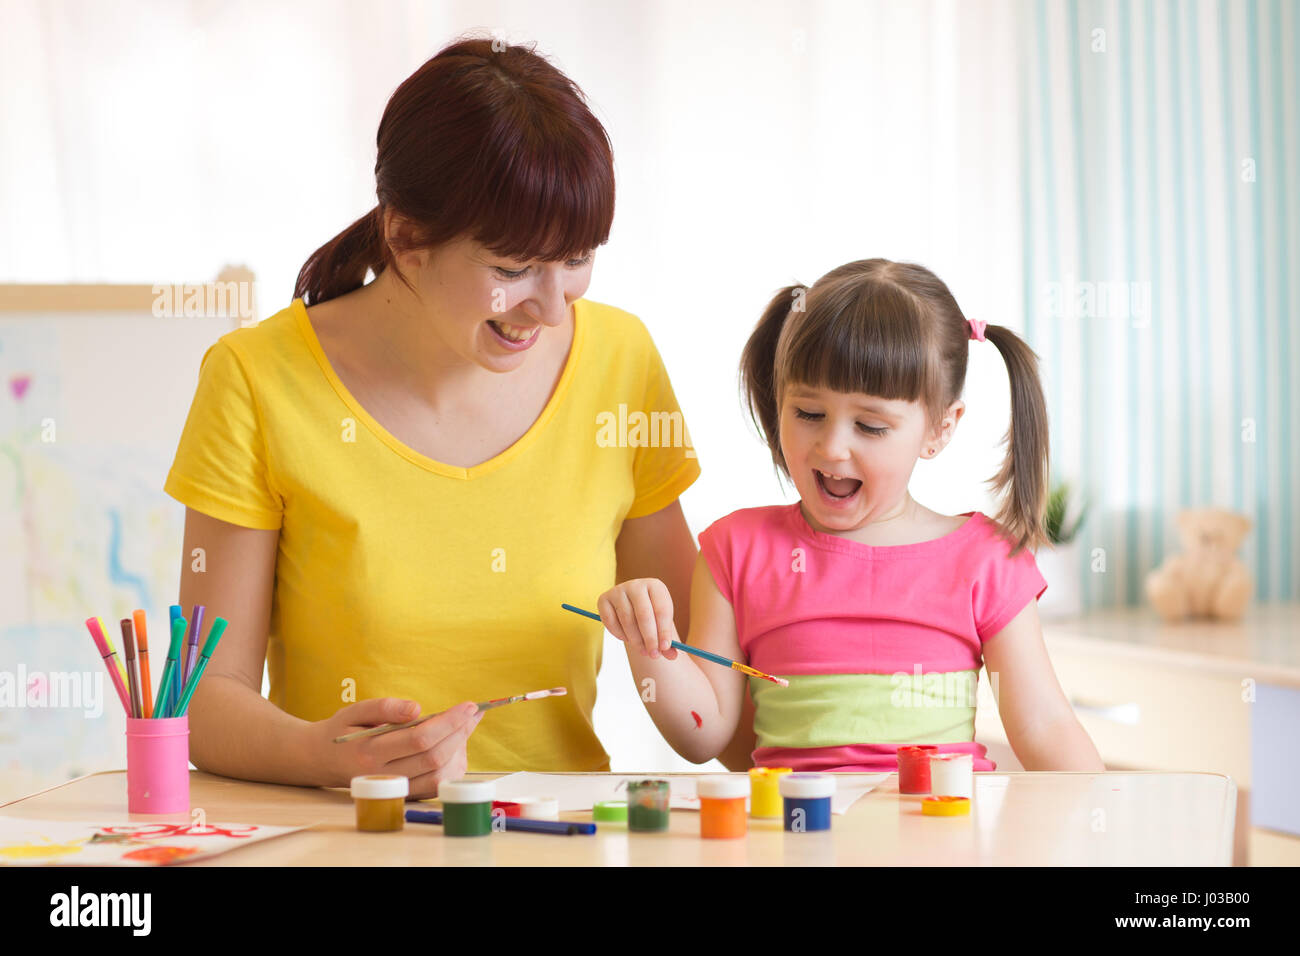 Happy kid and mom together paint. Adult woman helps the child girl. Stock Photo